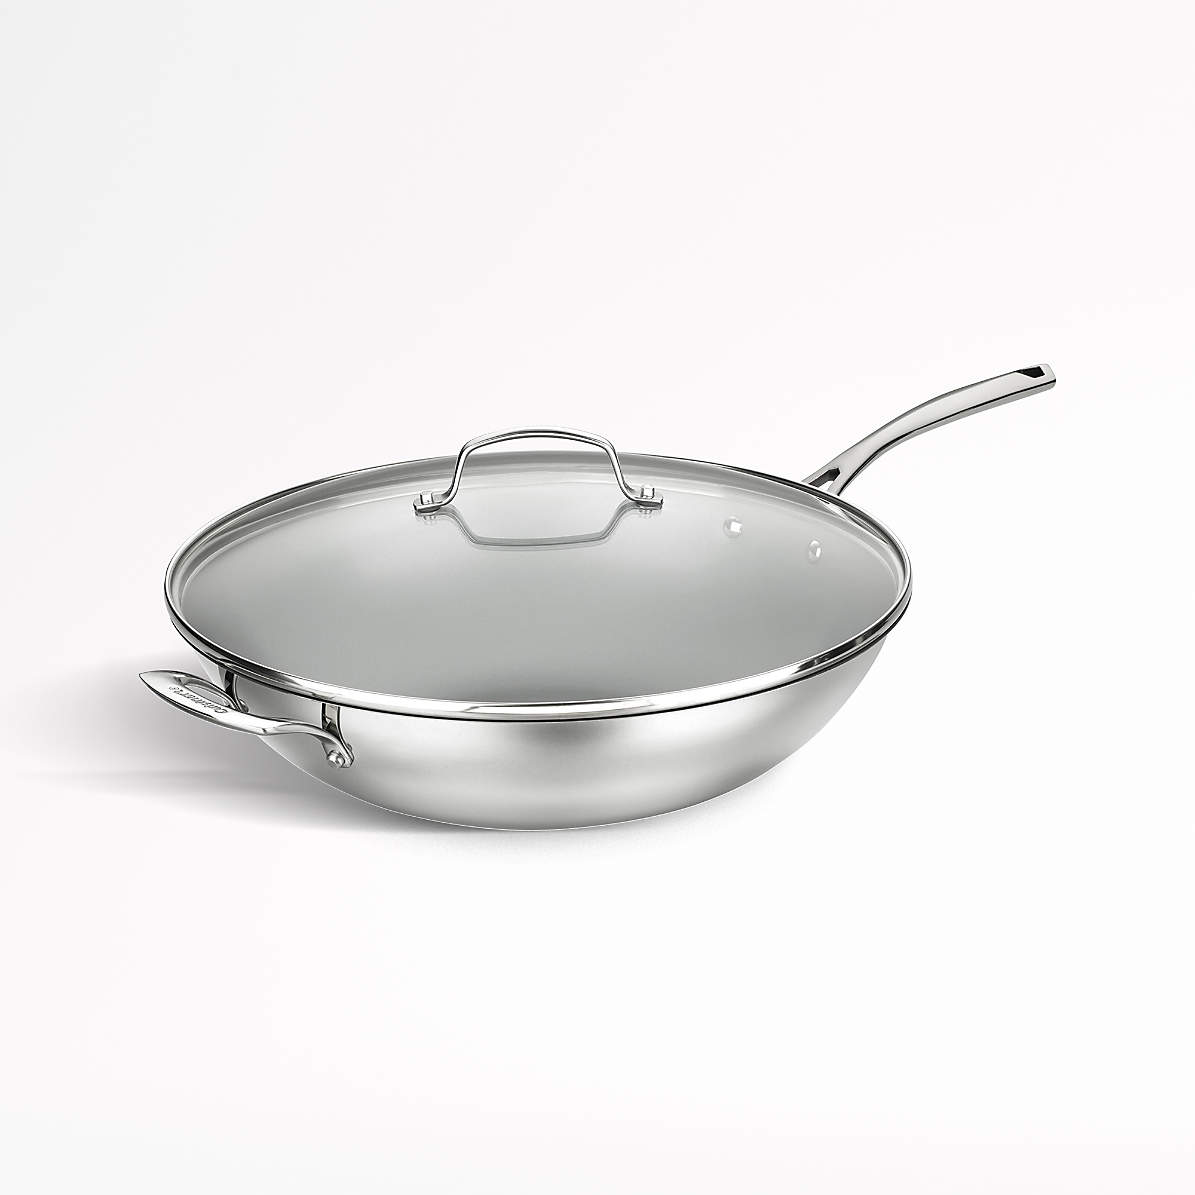 Forever Ware 3 Ply 18 8 Stainless Steel Skillet Fry Pan NO LID